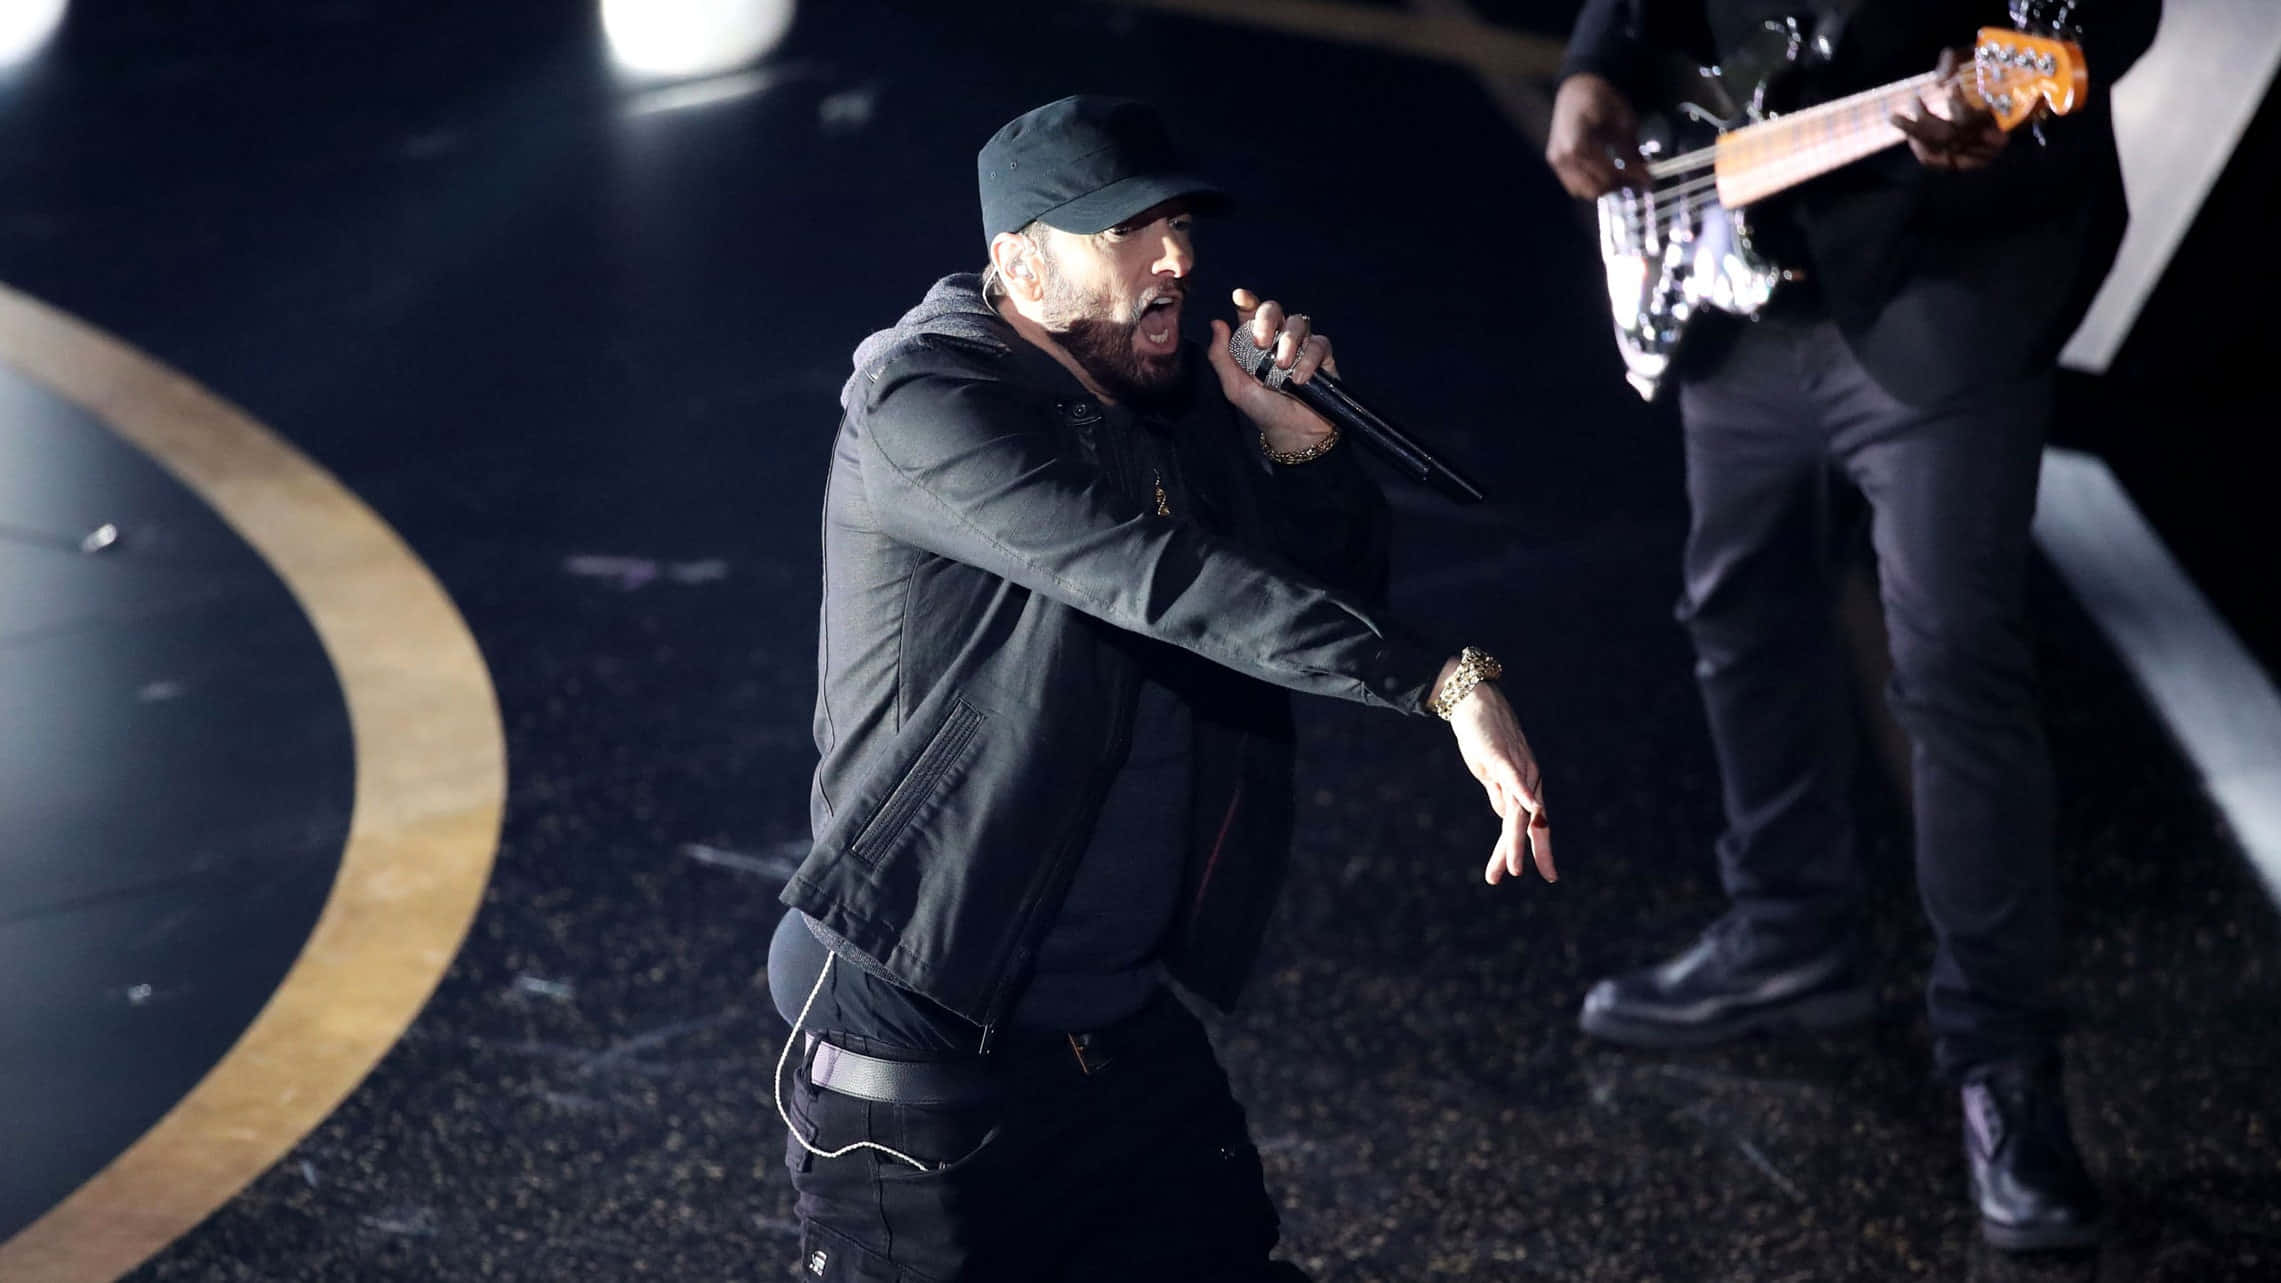 Caption: Eminem mesmerizes the crowd during a live performance